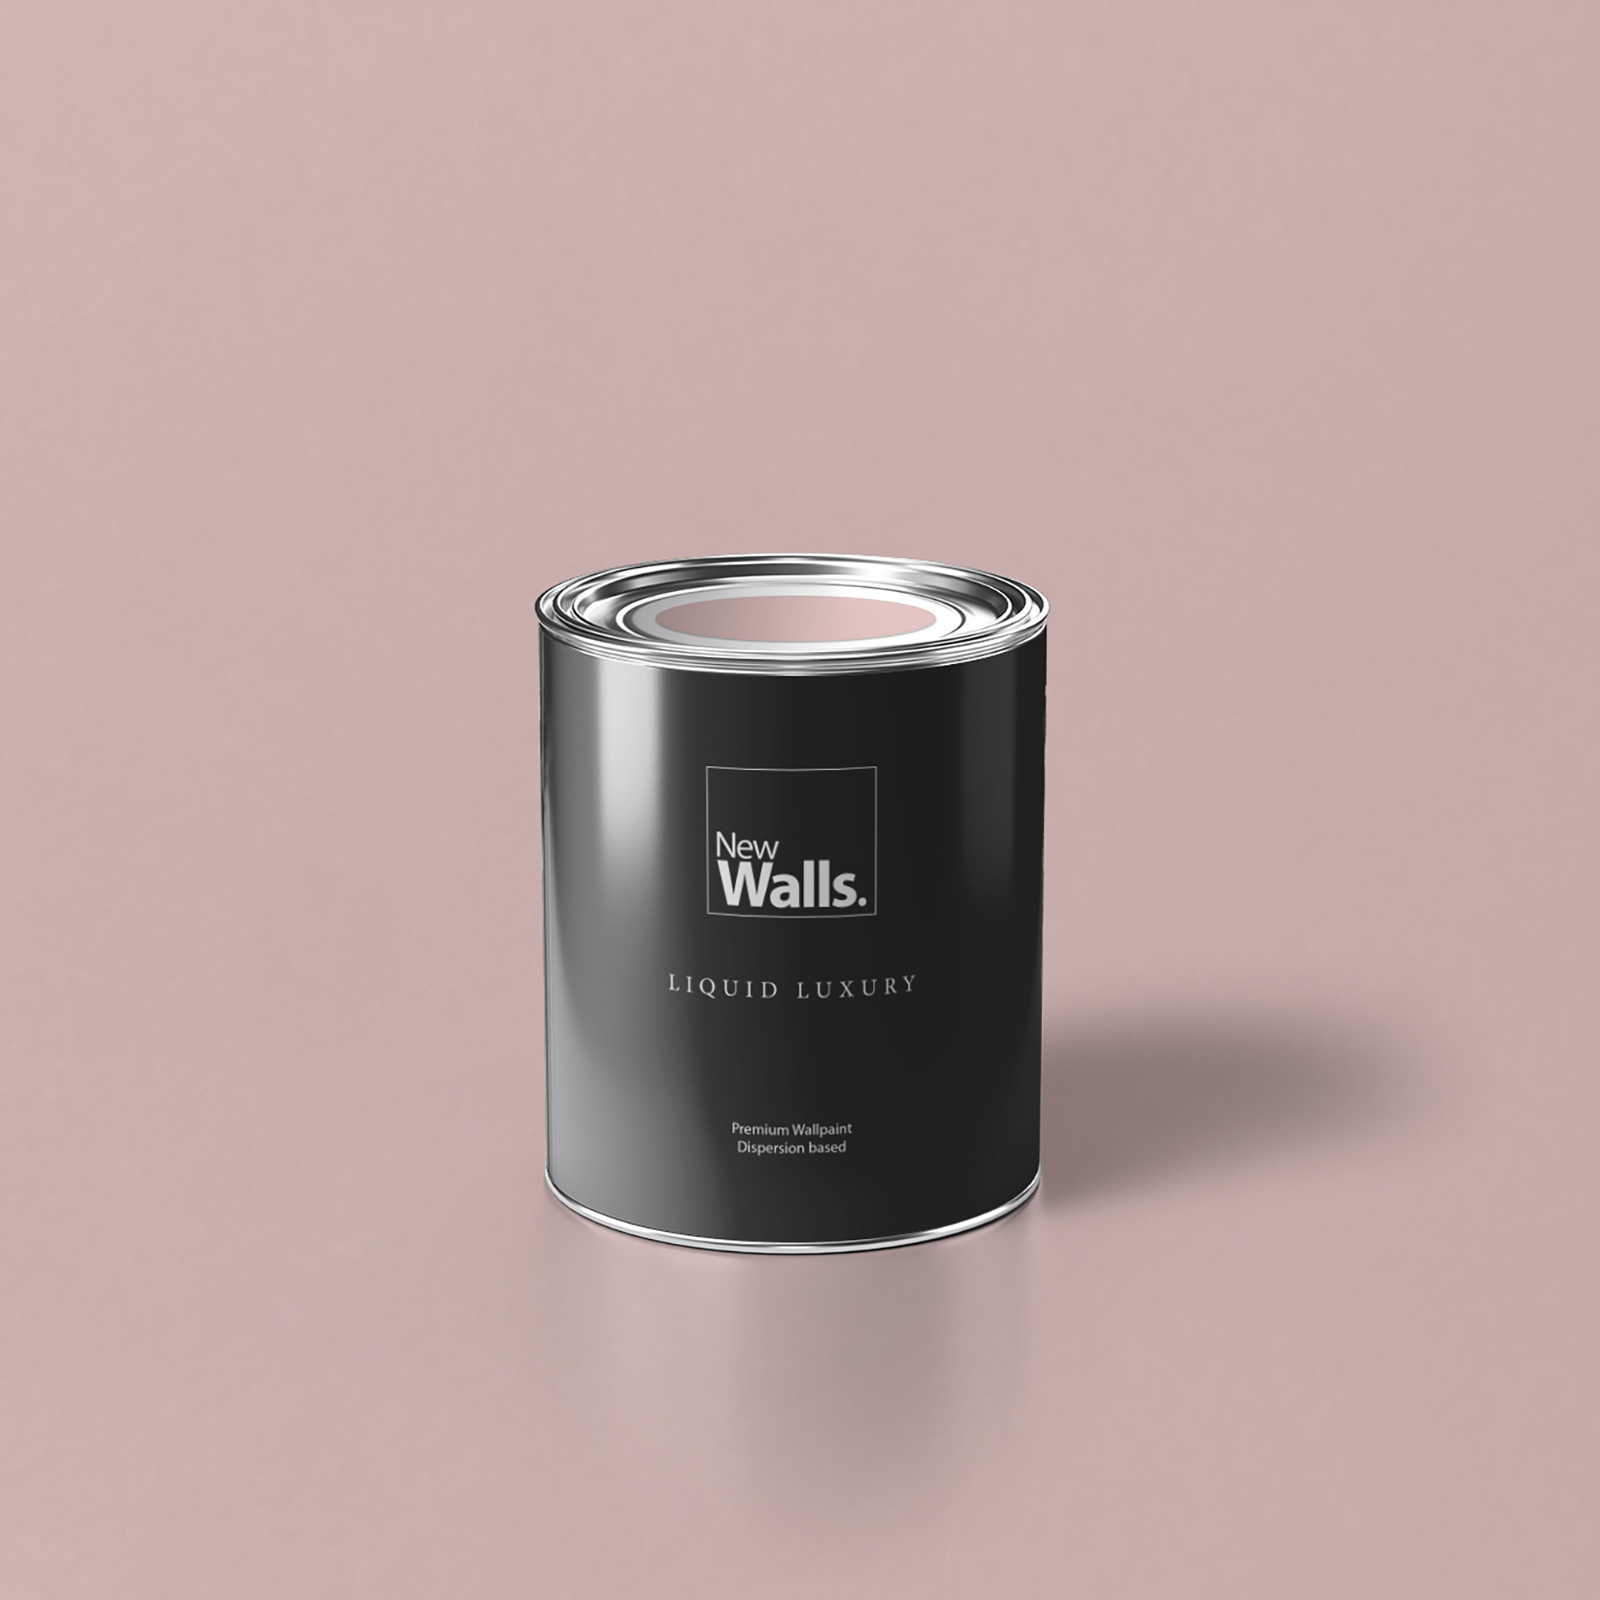         Premium Wall Paint Soft Old Pink »Natural Nude« NW1013 – 1 litre
    